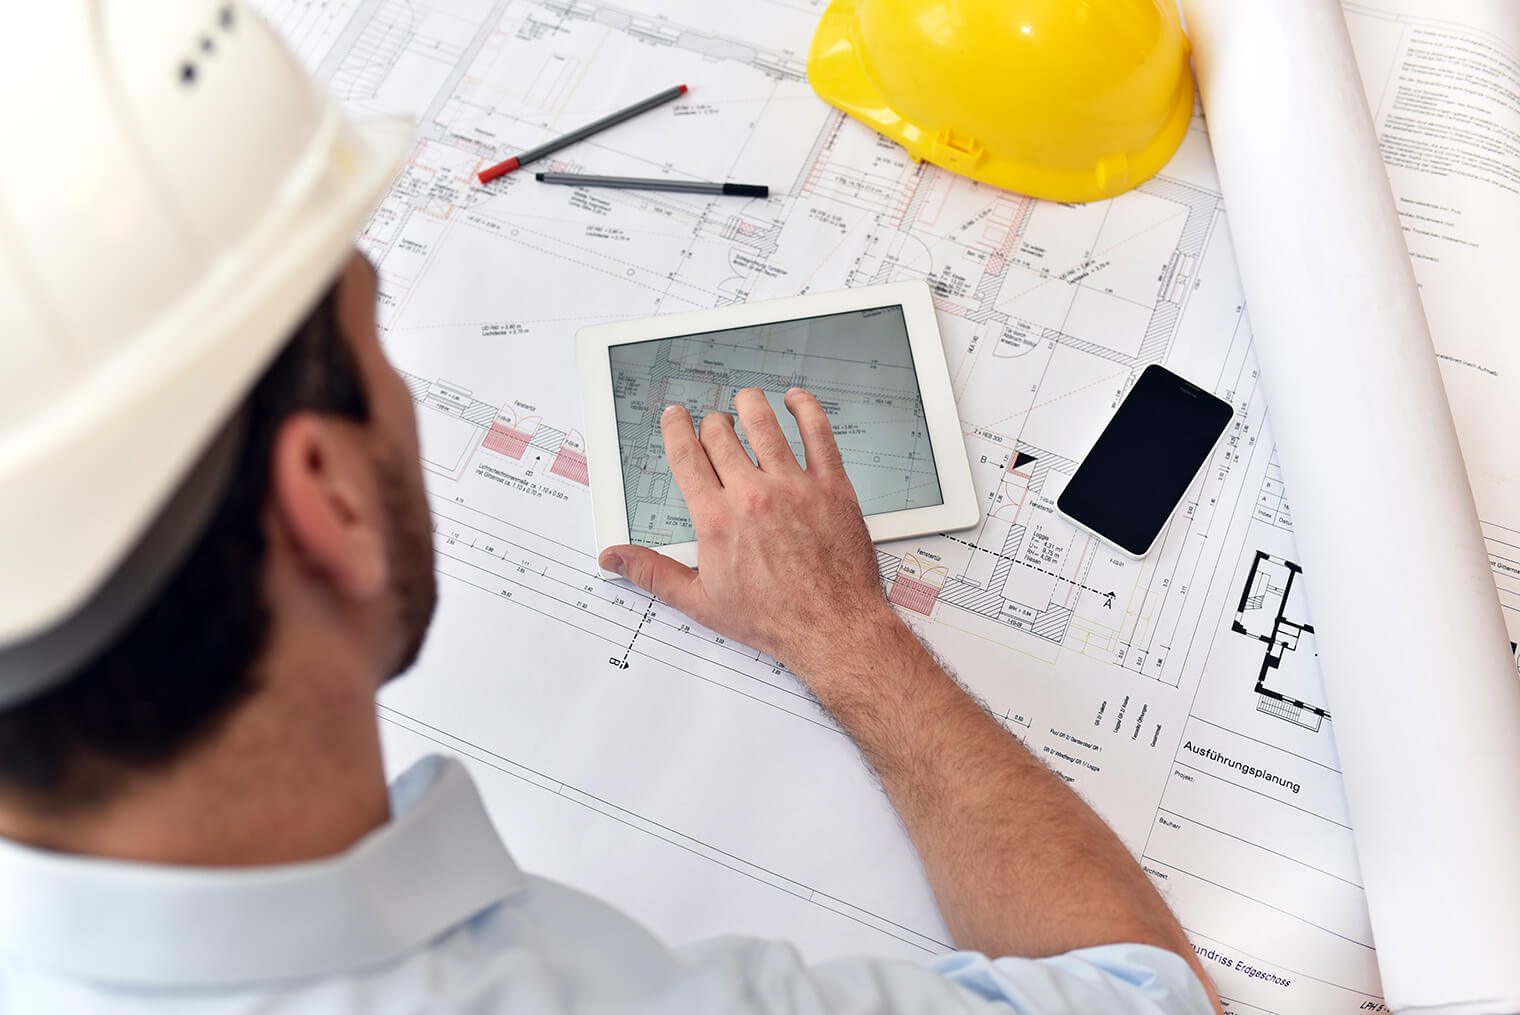 Stock image of man wearing a hard hat looking at building drawings with ipad